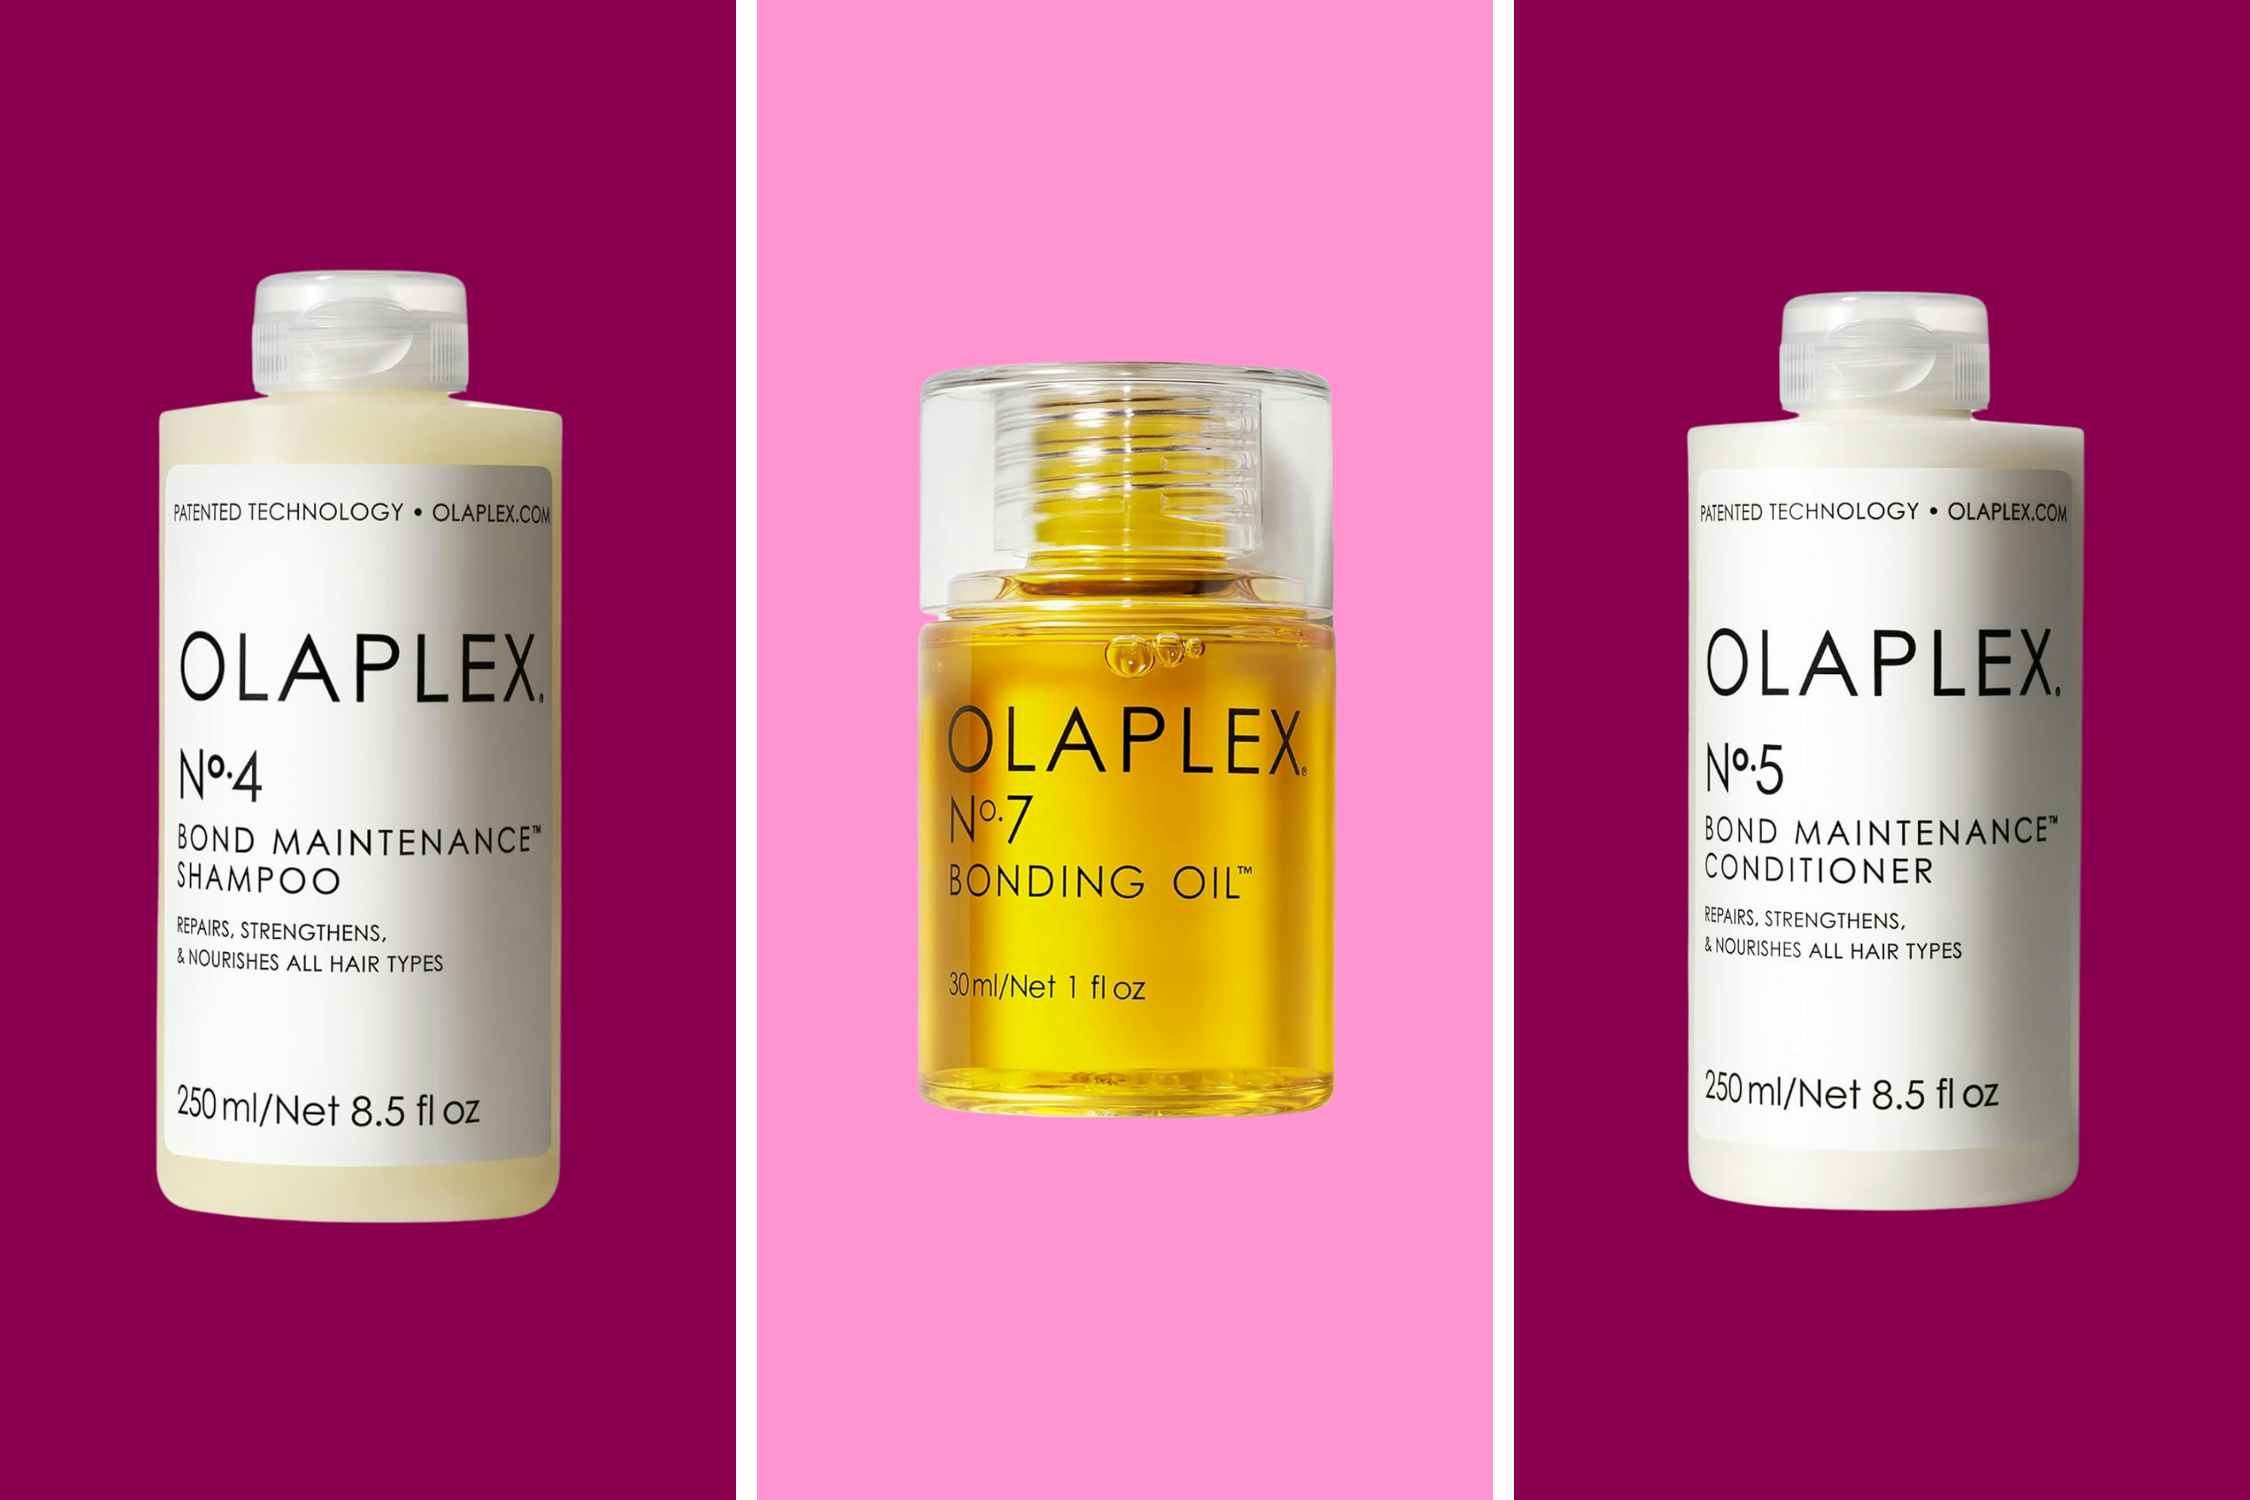 Score 2 Olaplex Products for $47 During Amazon's Summer Beauty Haul